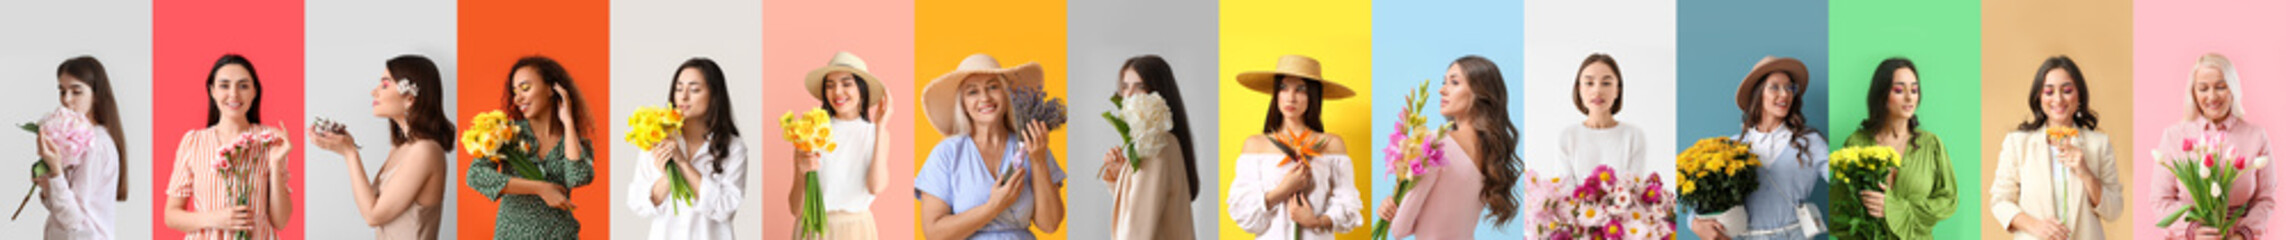 Group of beautiful women with fresh flowers on color background